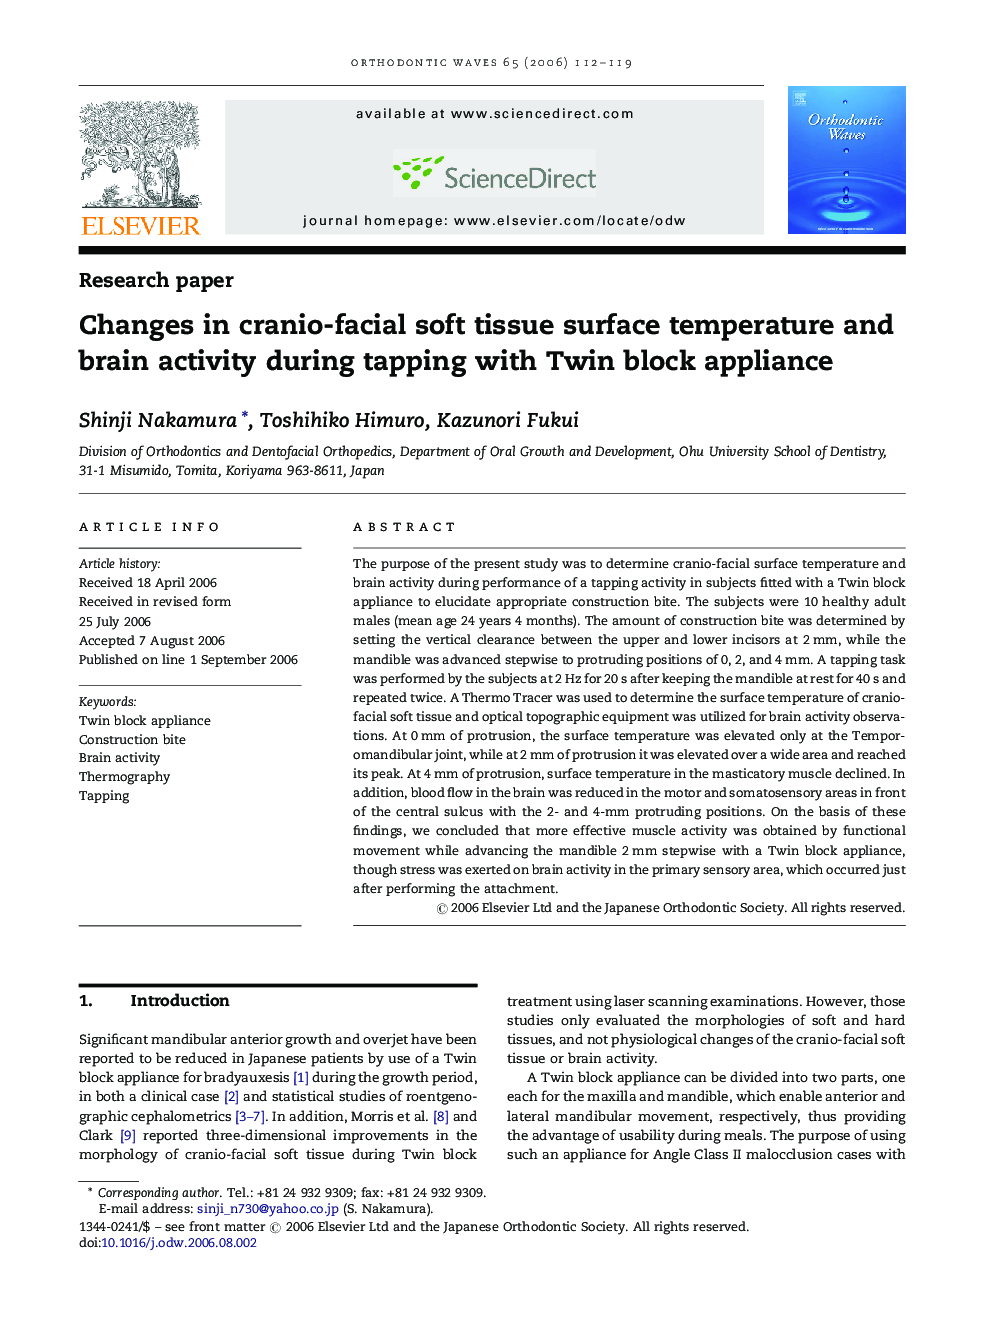 Changes in cranio-facial soft tissue surface temperature and brain activity during tapping with Twin block appliance